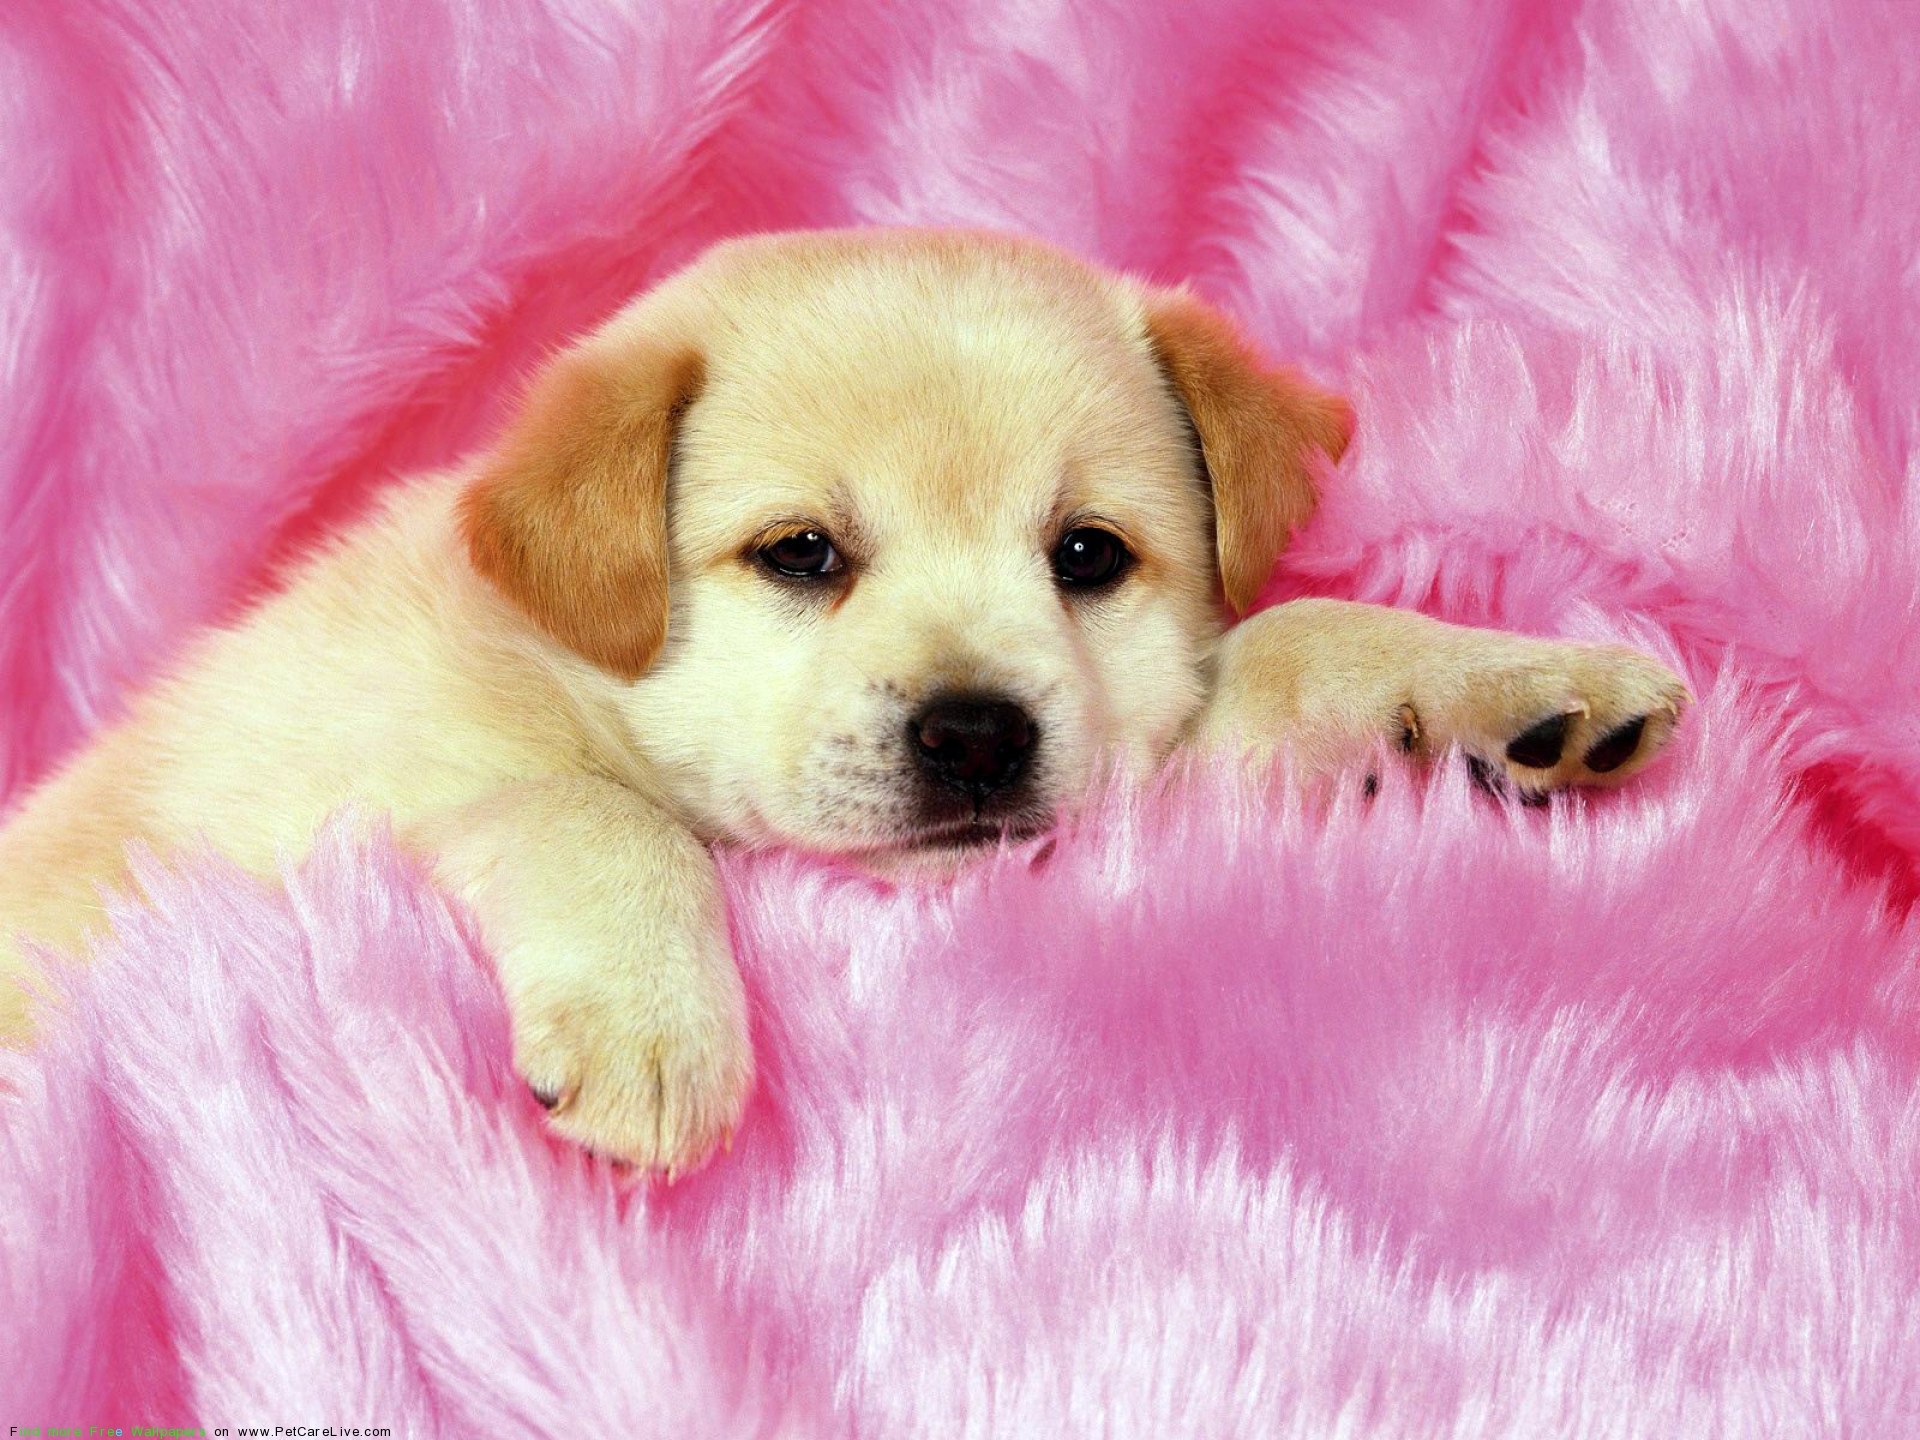 Cute doggy wallpapers